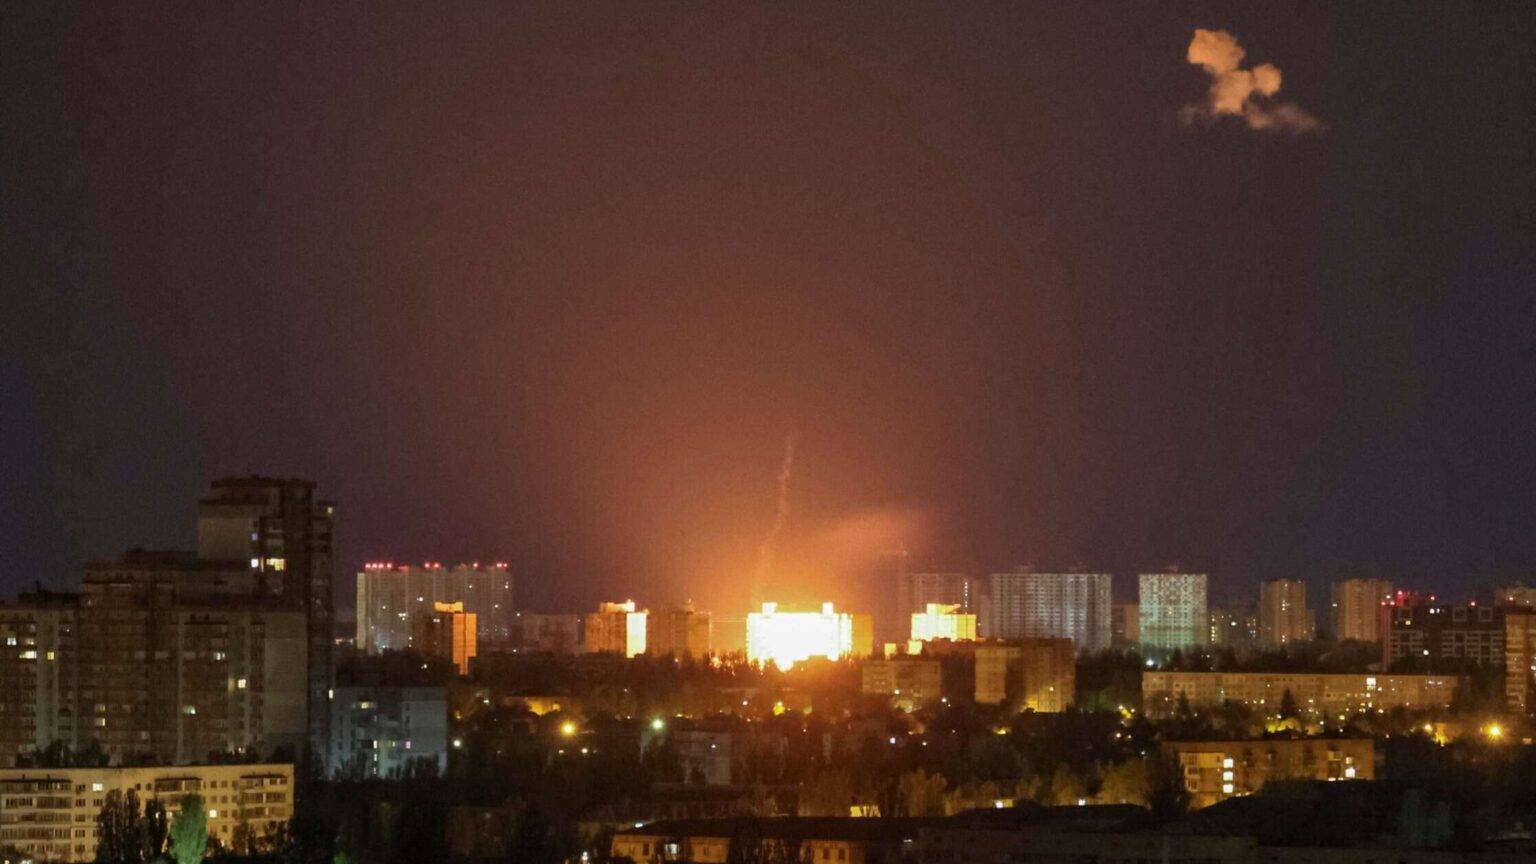 Kyiv under drone attack barrage for second night